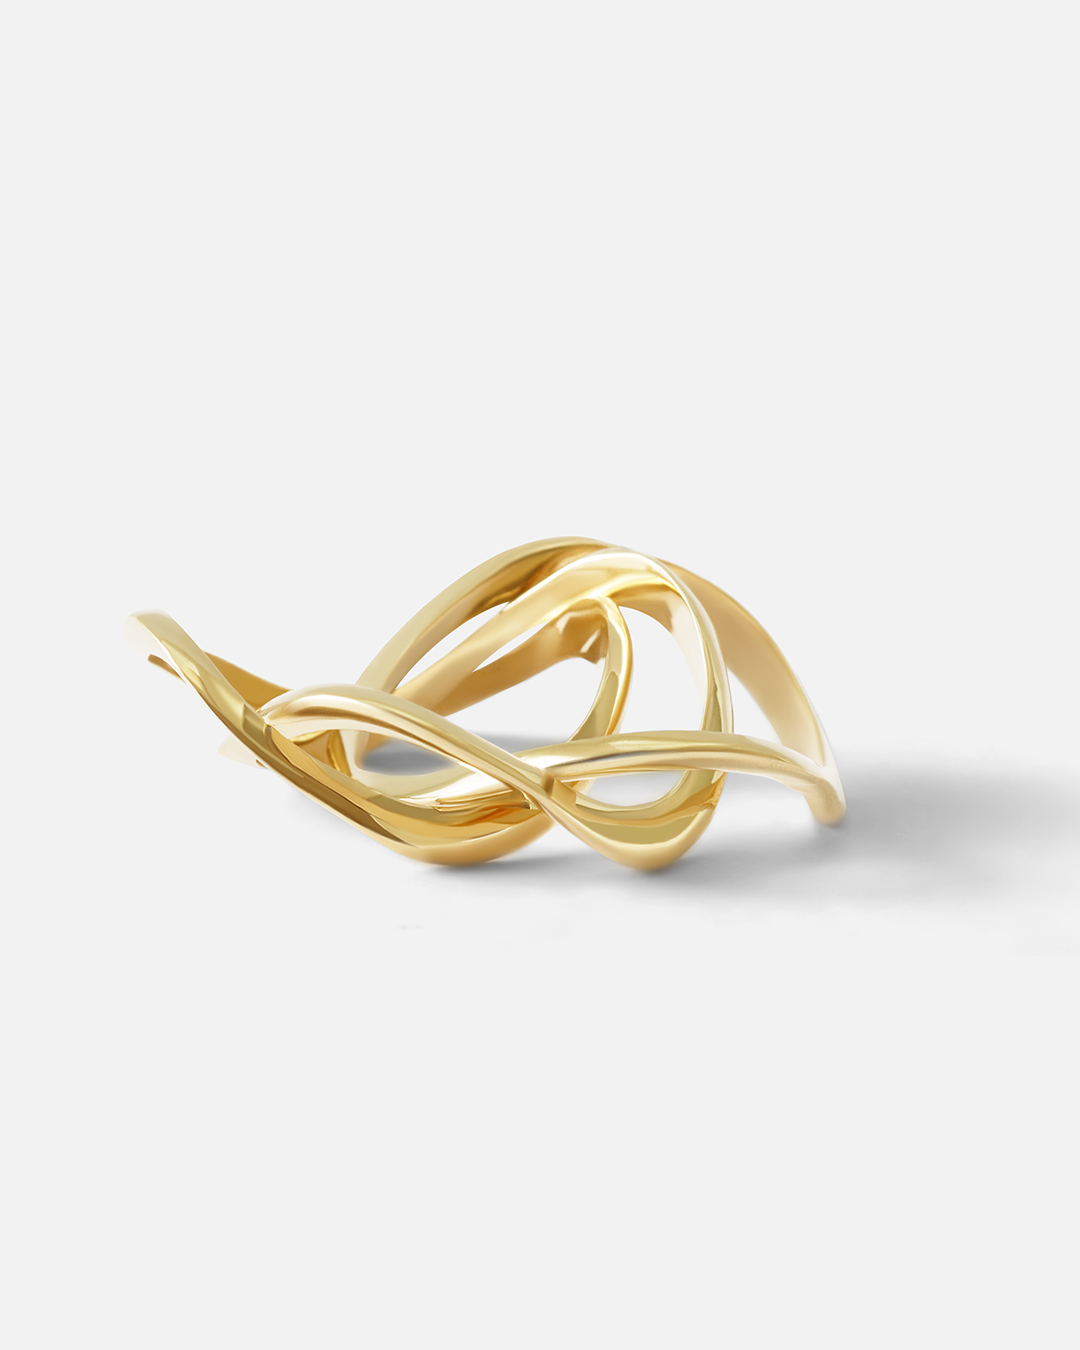 Front product view of Lucia B Marti's Twist Stack Rings